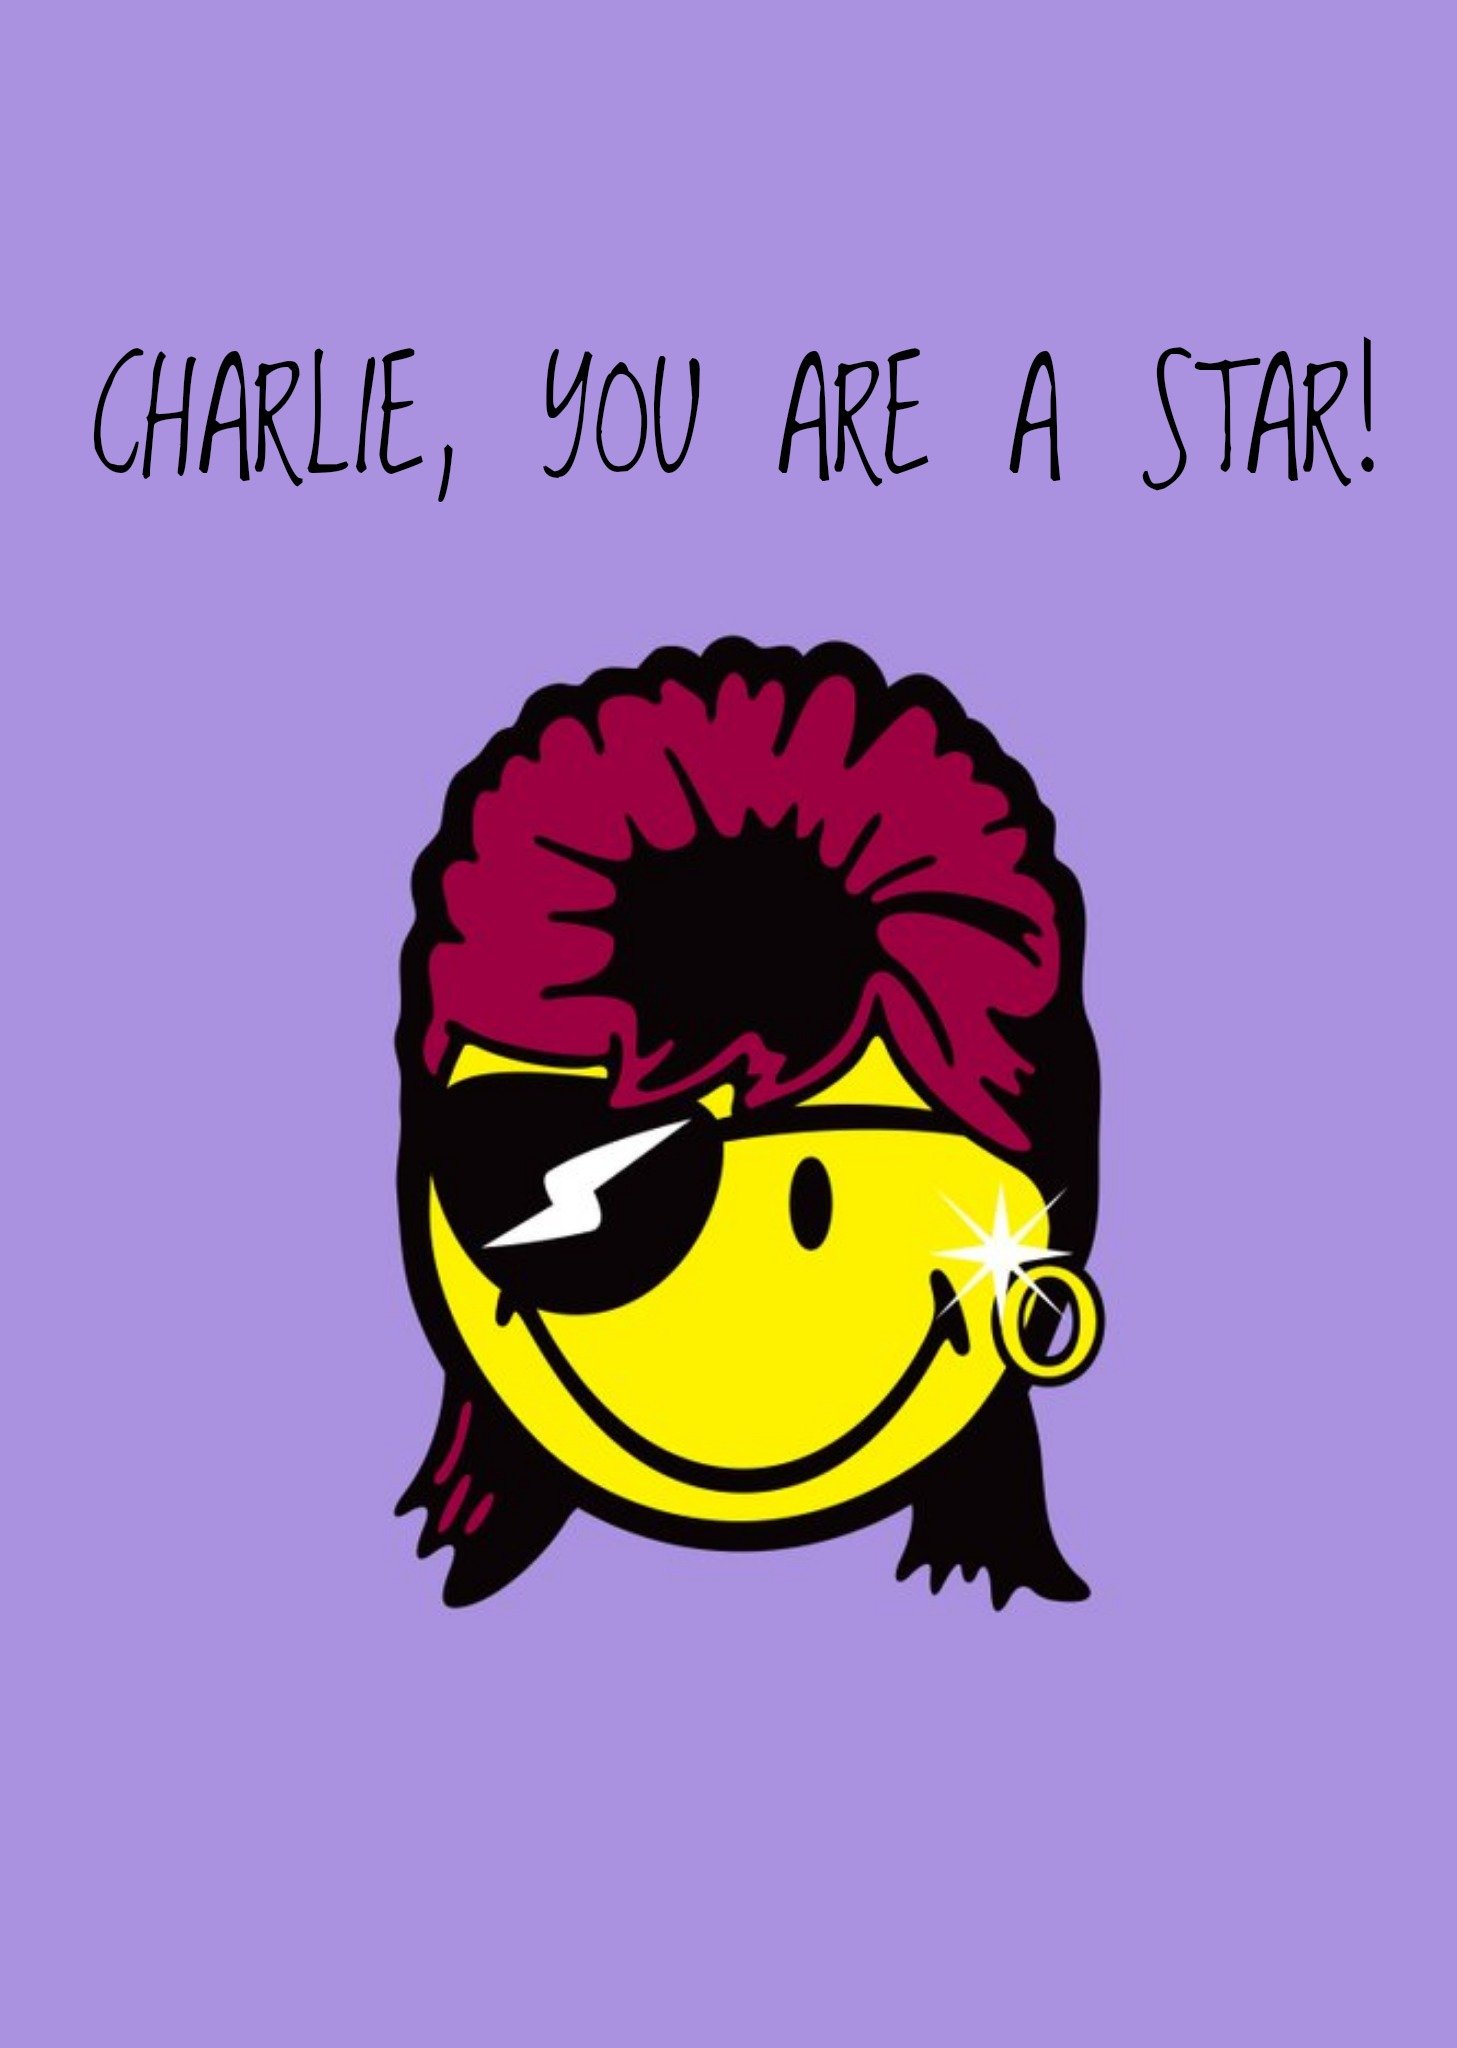 Moonpig Smiley World - You Are A Star David Bowie Birthday Card, Large